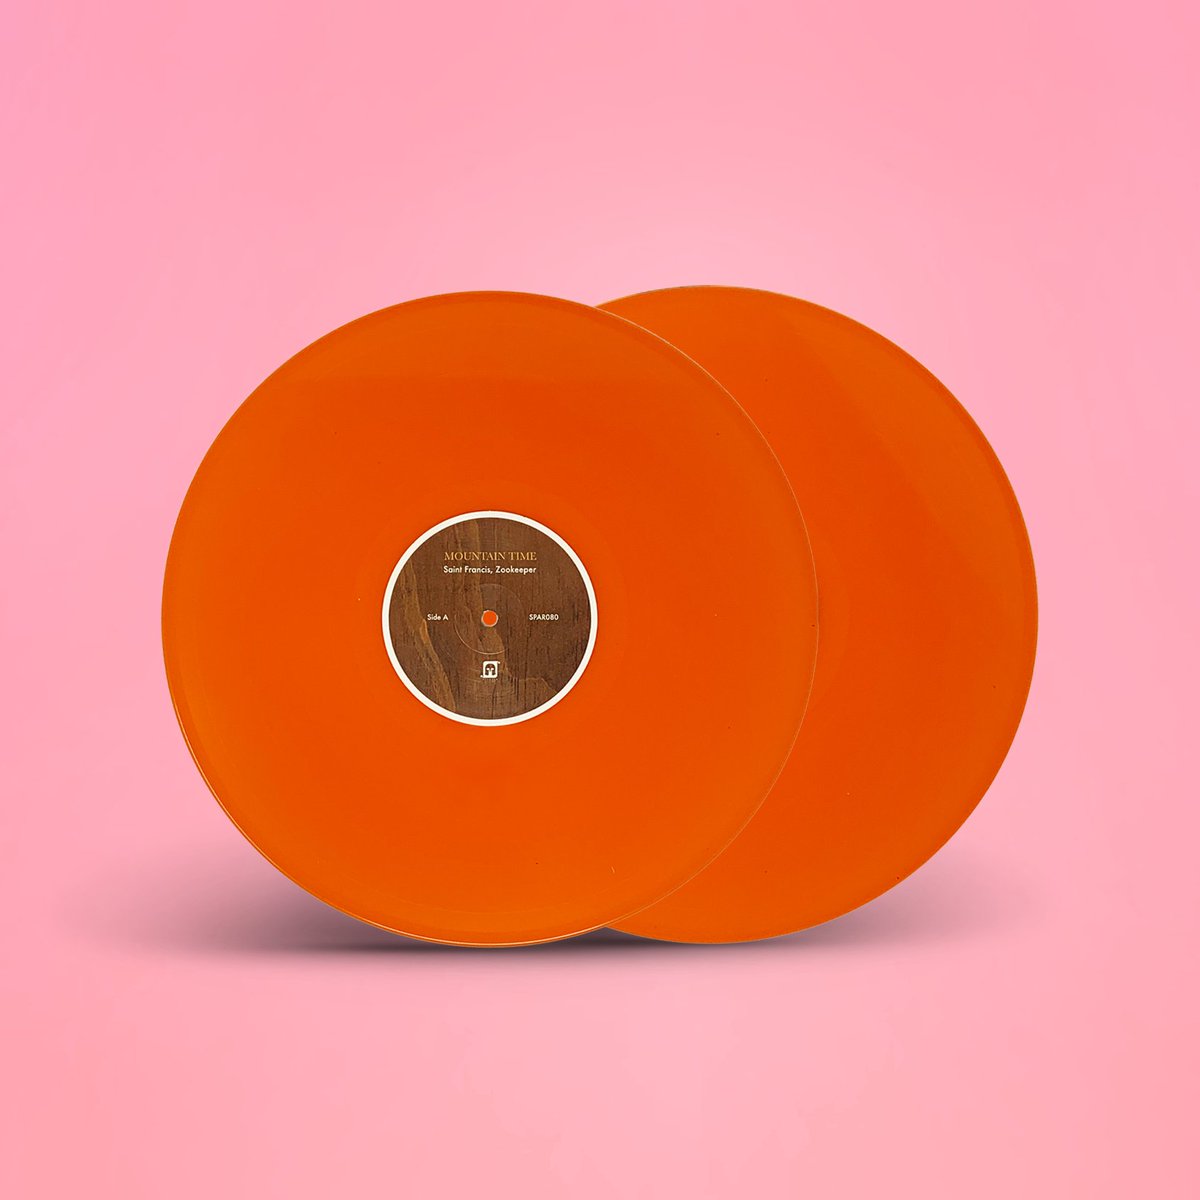 The last of the “Saint Francis, Zookeeper” variants is the Transparent Orange variant which was limited to 100 copies and sold out quickly. If you missed out, there's one extra copy available now in the @spartanrecords store. 🧡 spr.tn/mtsfz